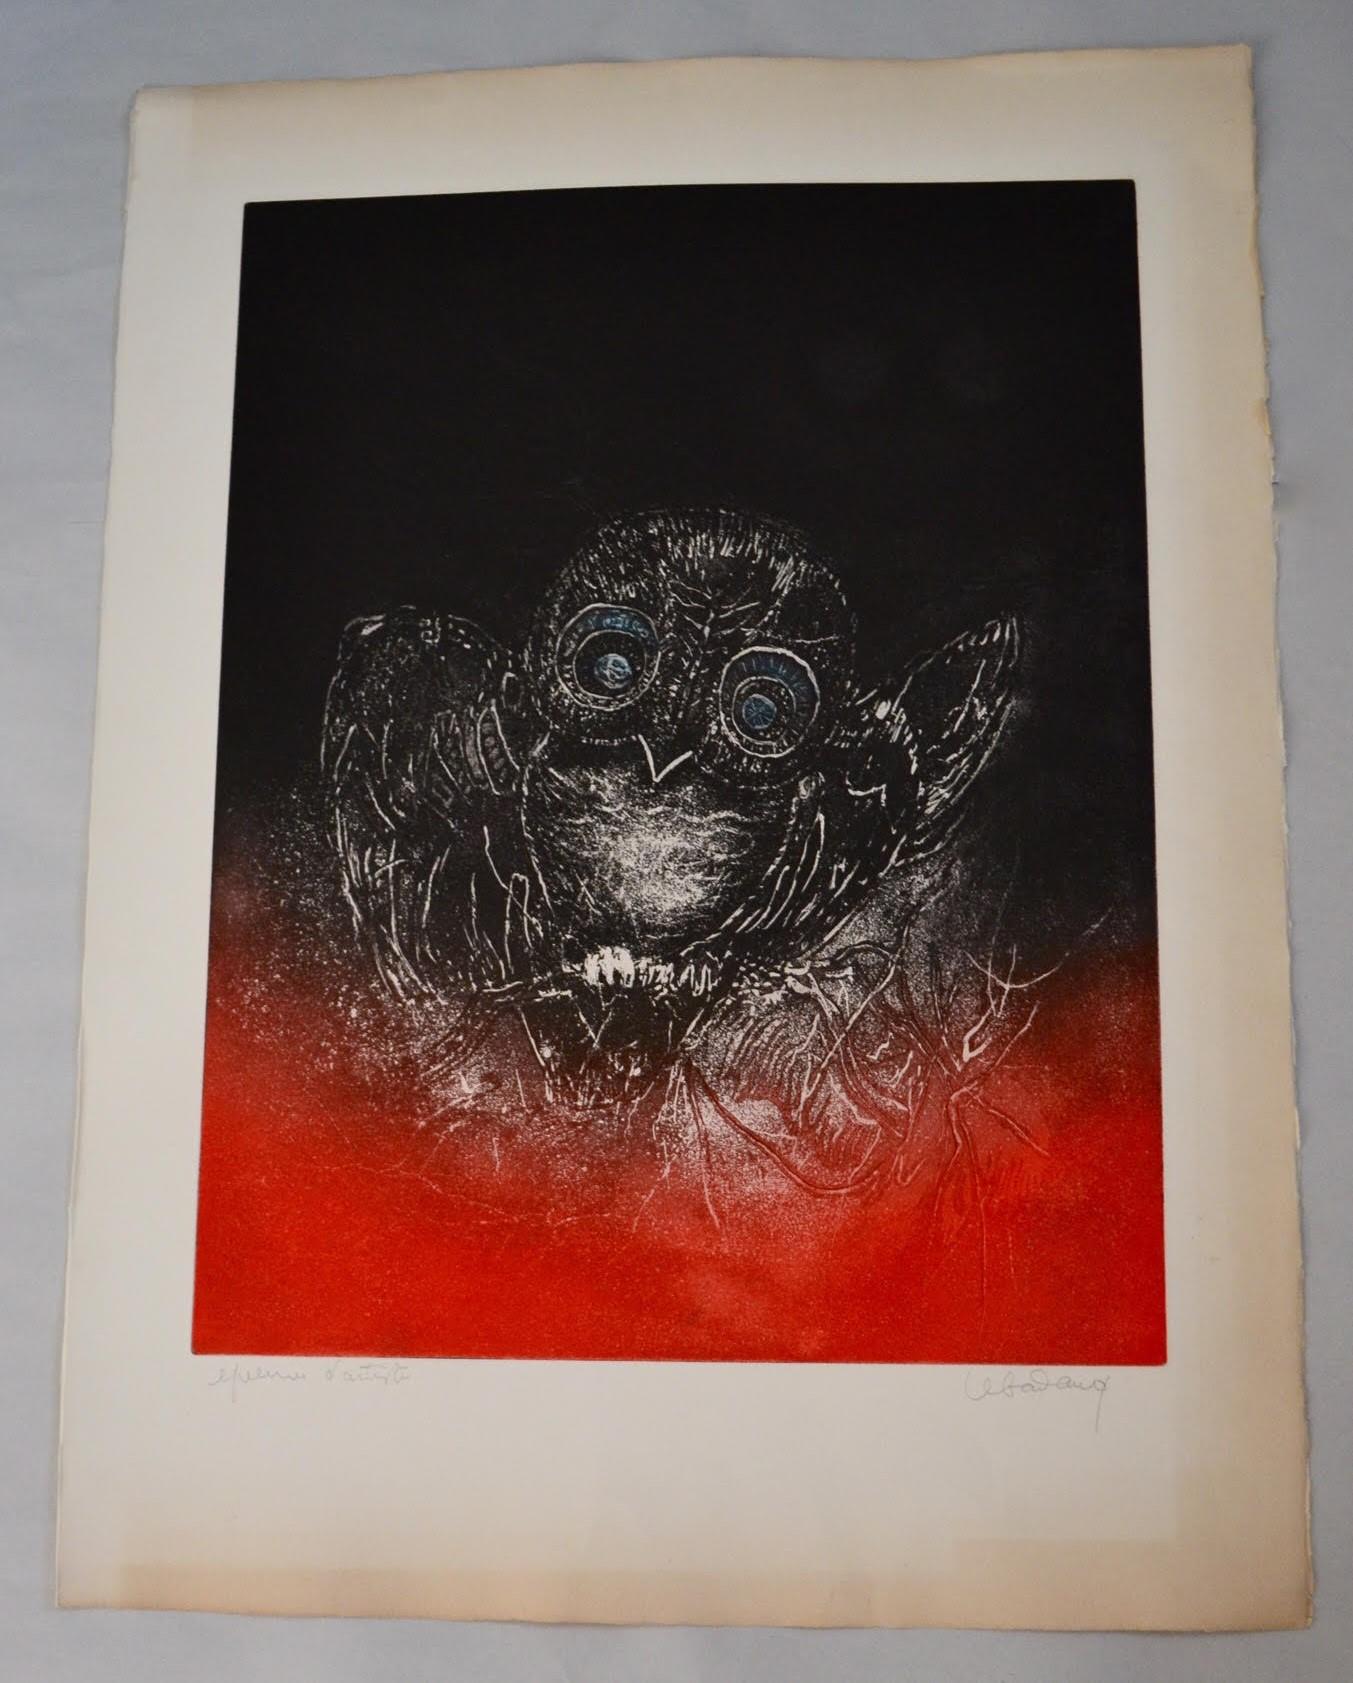 A rare and hard to find owl image by Vietnamese born renowned French printmaker / artist Hoi Lebadang.

The print is pencil signed and noted as artist proof in French by the artist. 

Lebadang's work can be found in various prominent collections